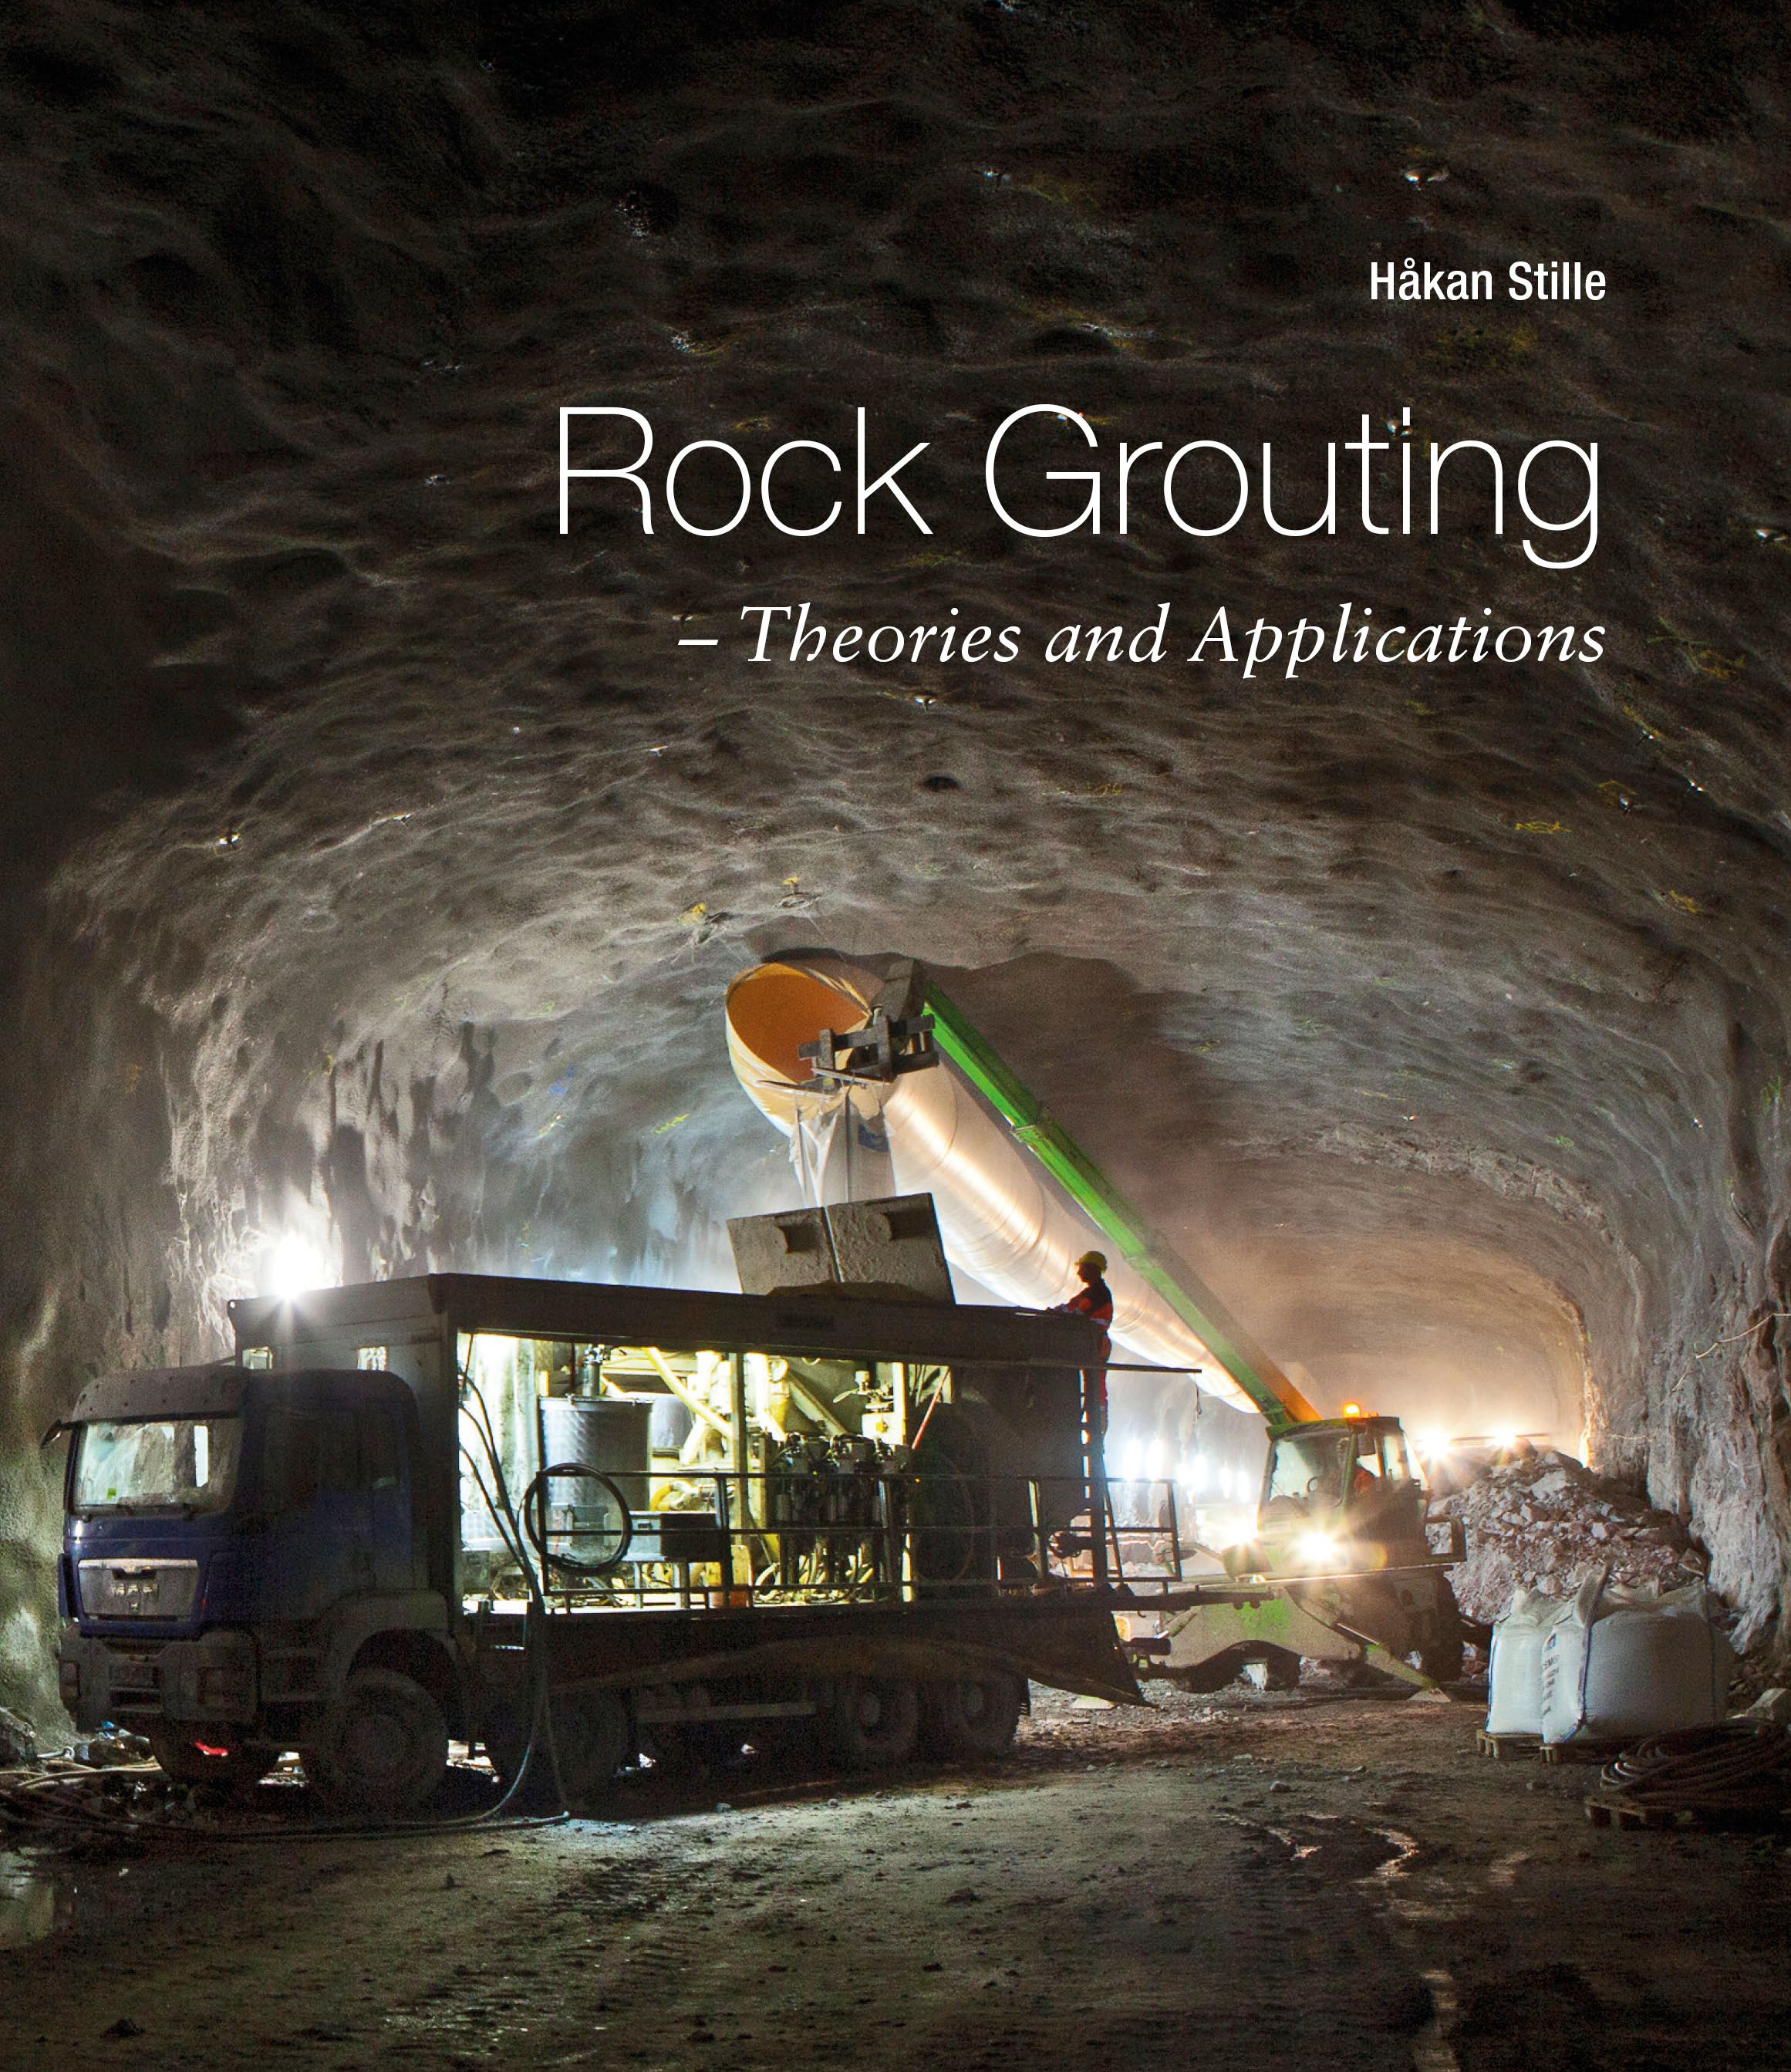 Rock Grouting – Theories and Applications, eBook by Håkan Stille